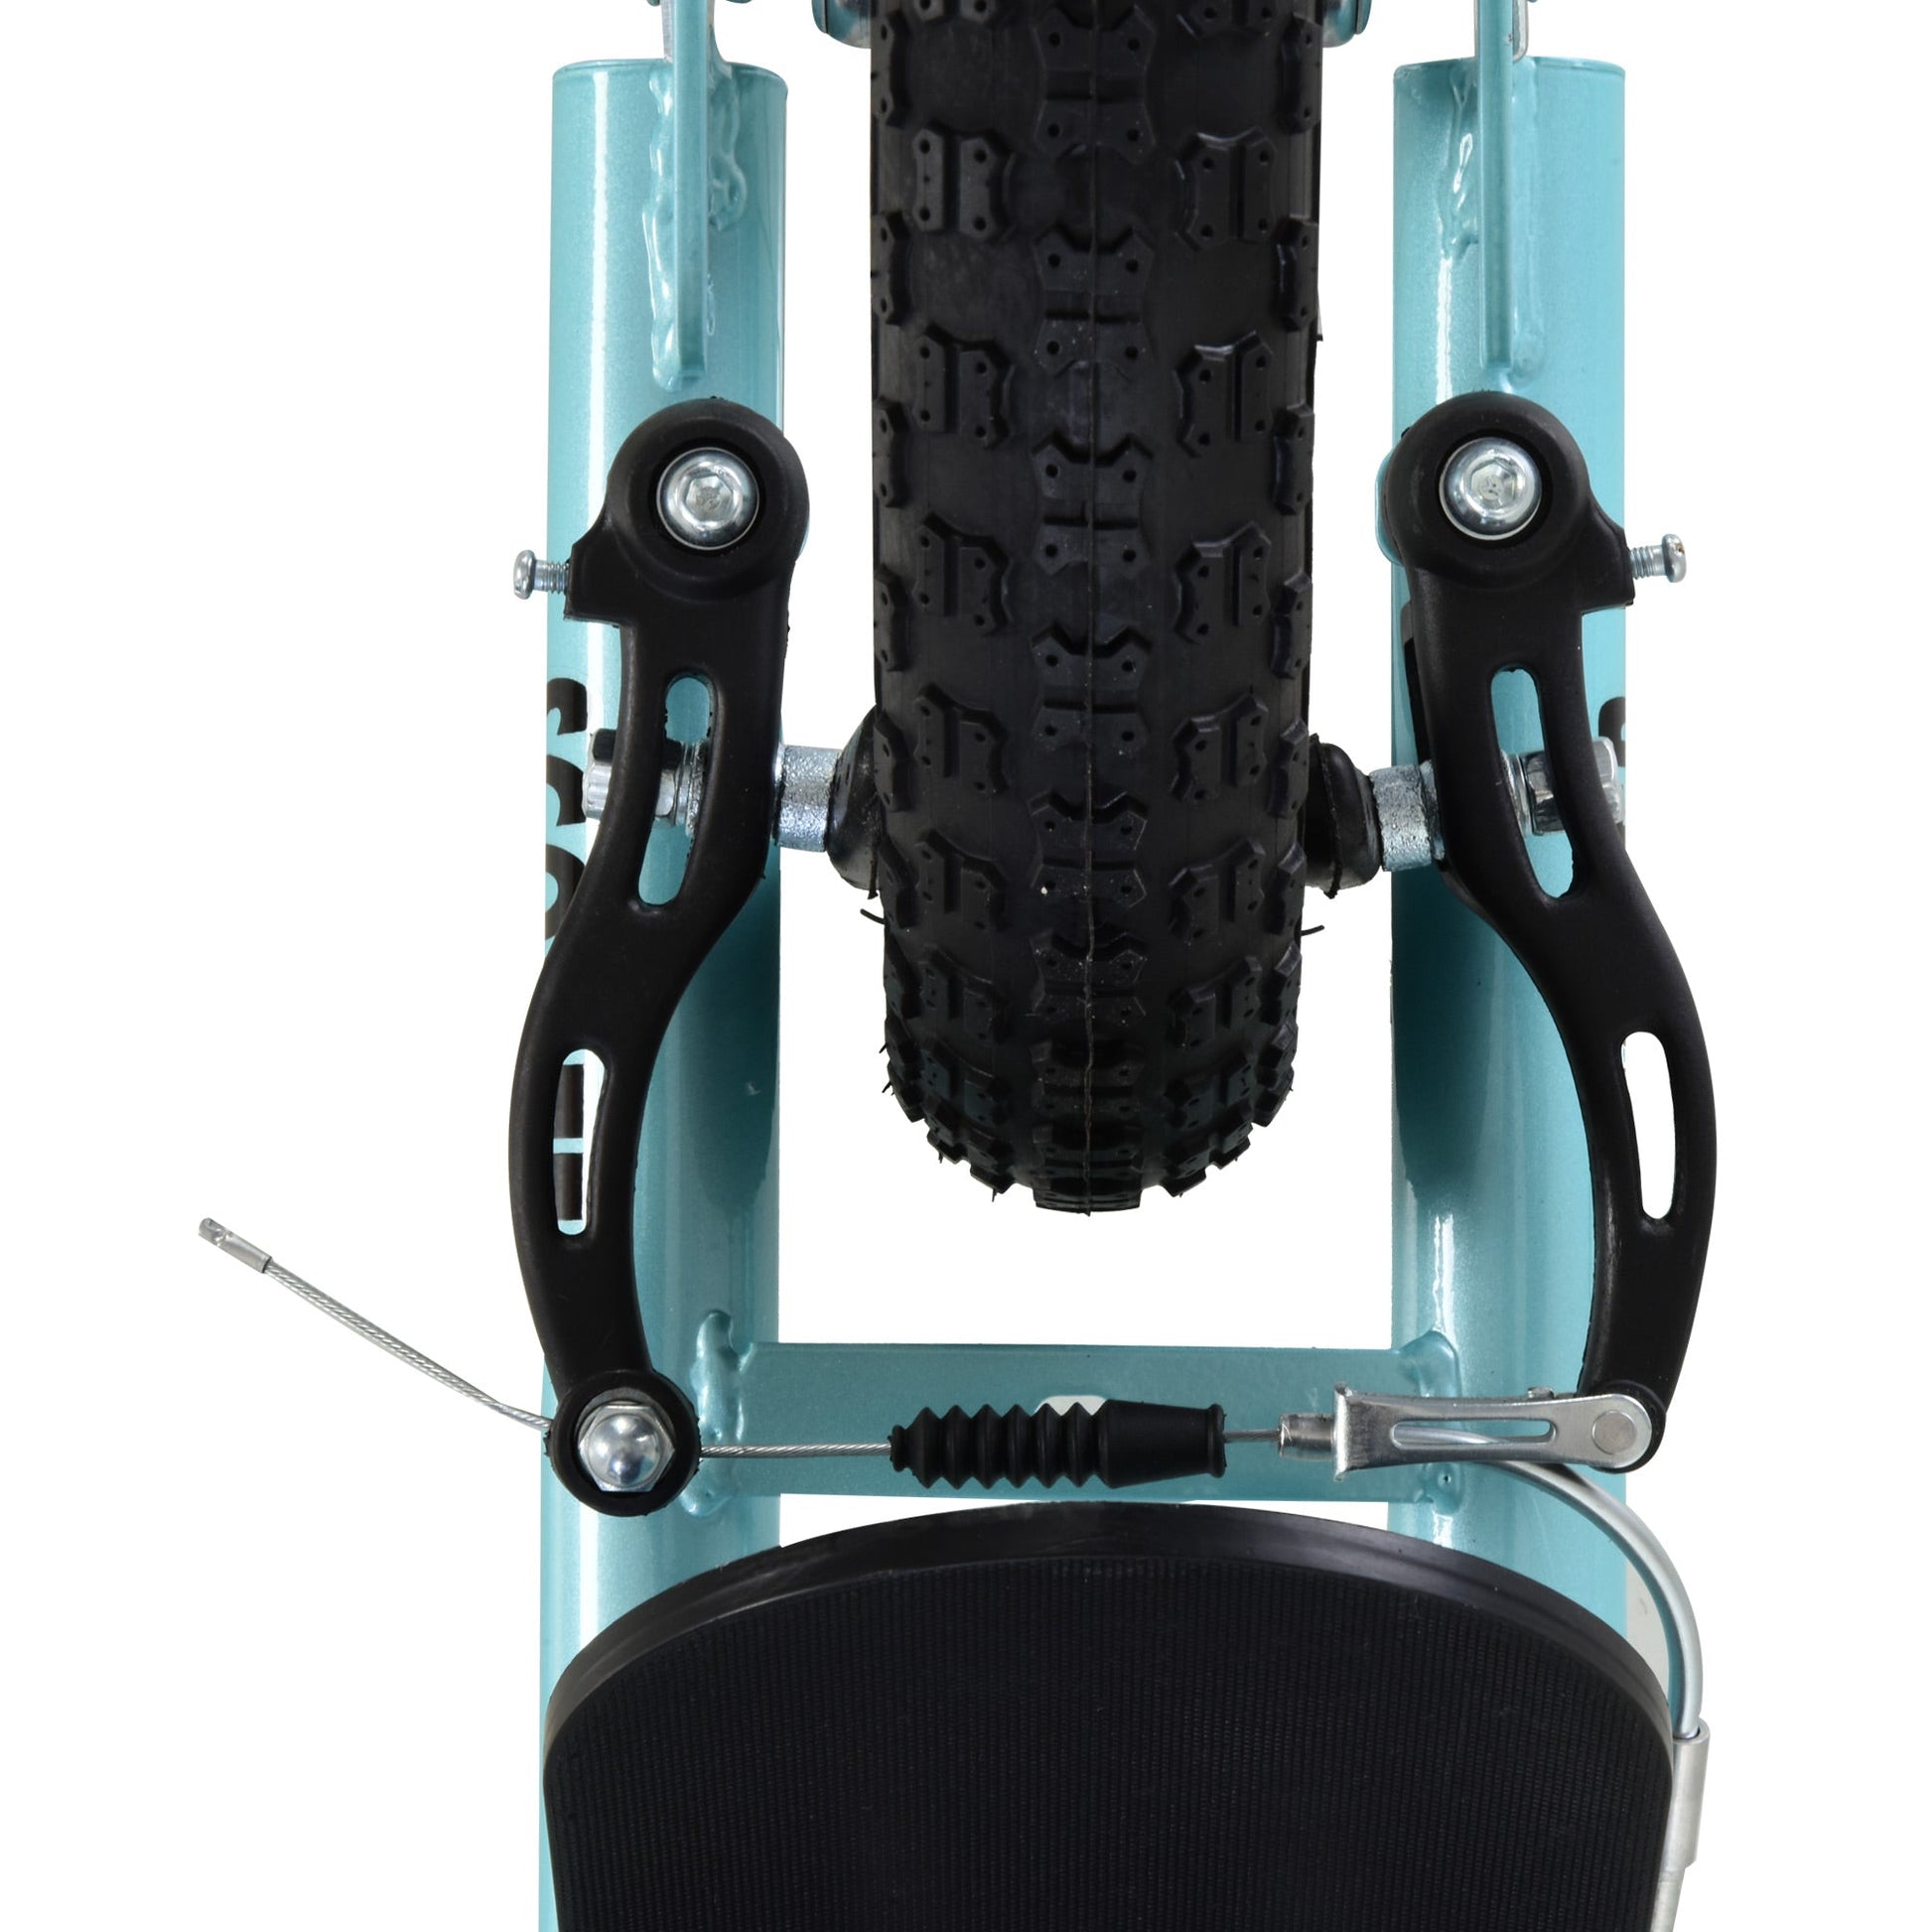 Youth Kick Scooter with Adjustable Handlebar and 16'' Inflatable Rubber Wheel for Kids and Teens 5+ Year Old, Blue at Gallery Canada